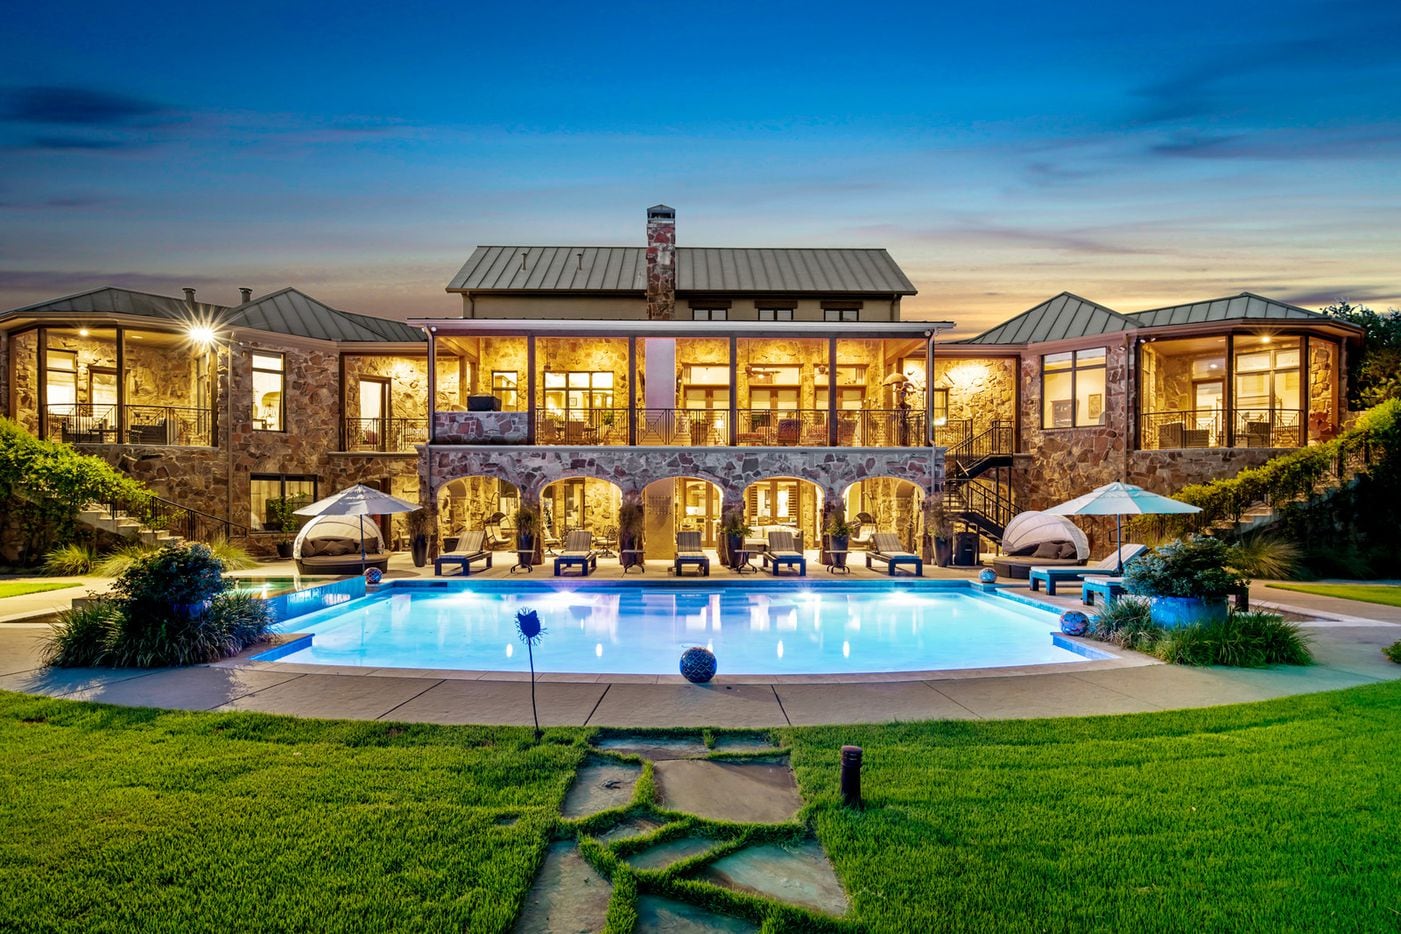 The exterior of 3 Stonebriar Way in Frisco, TX.